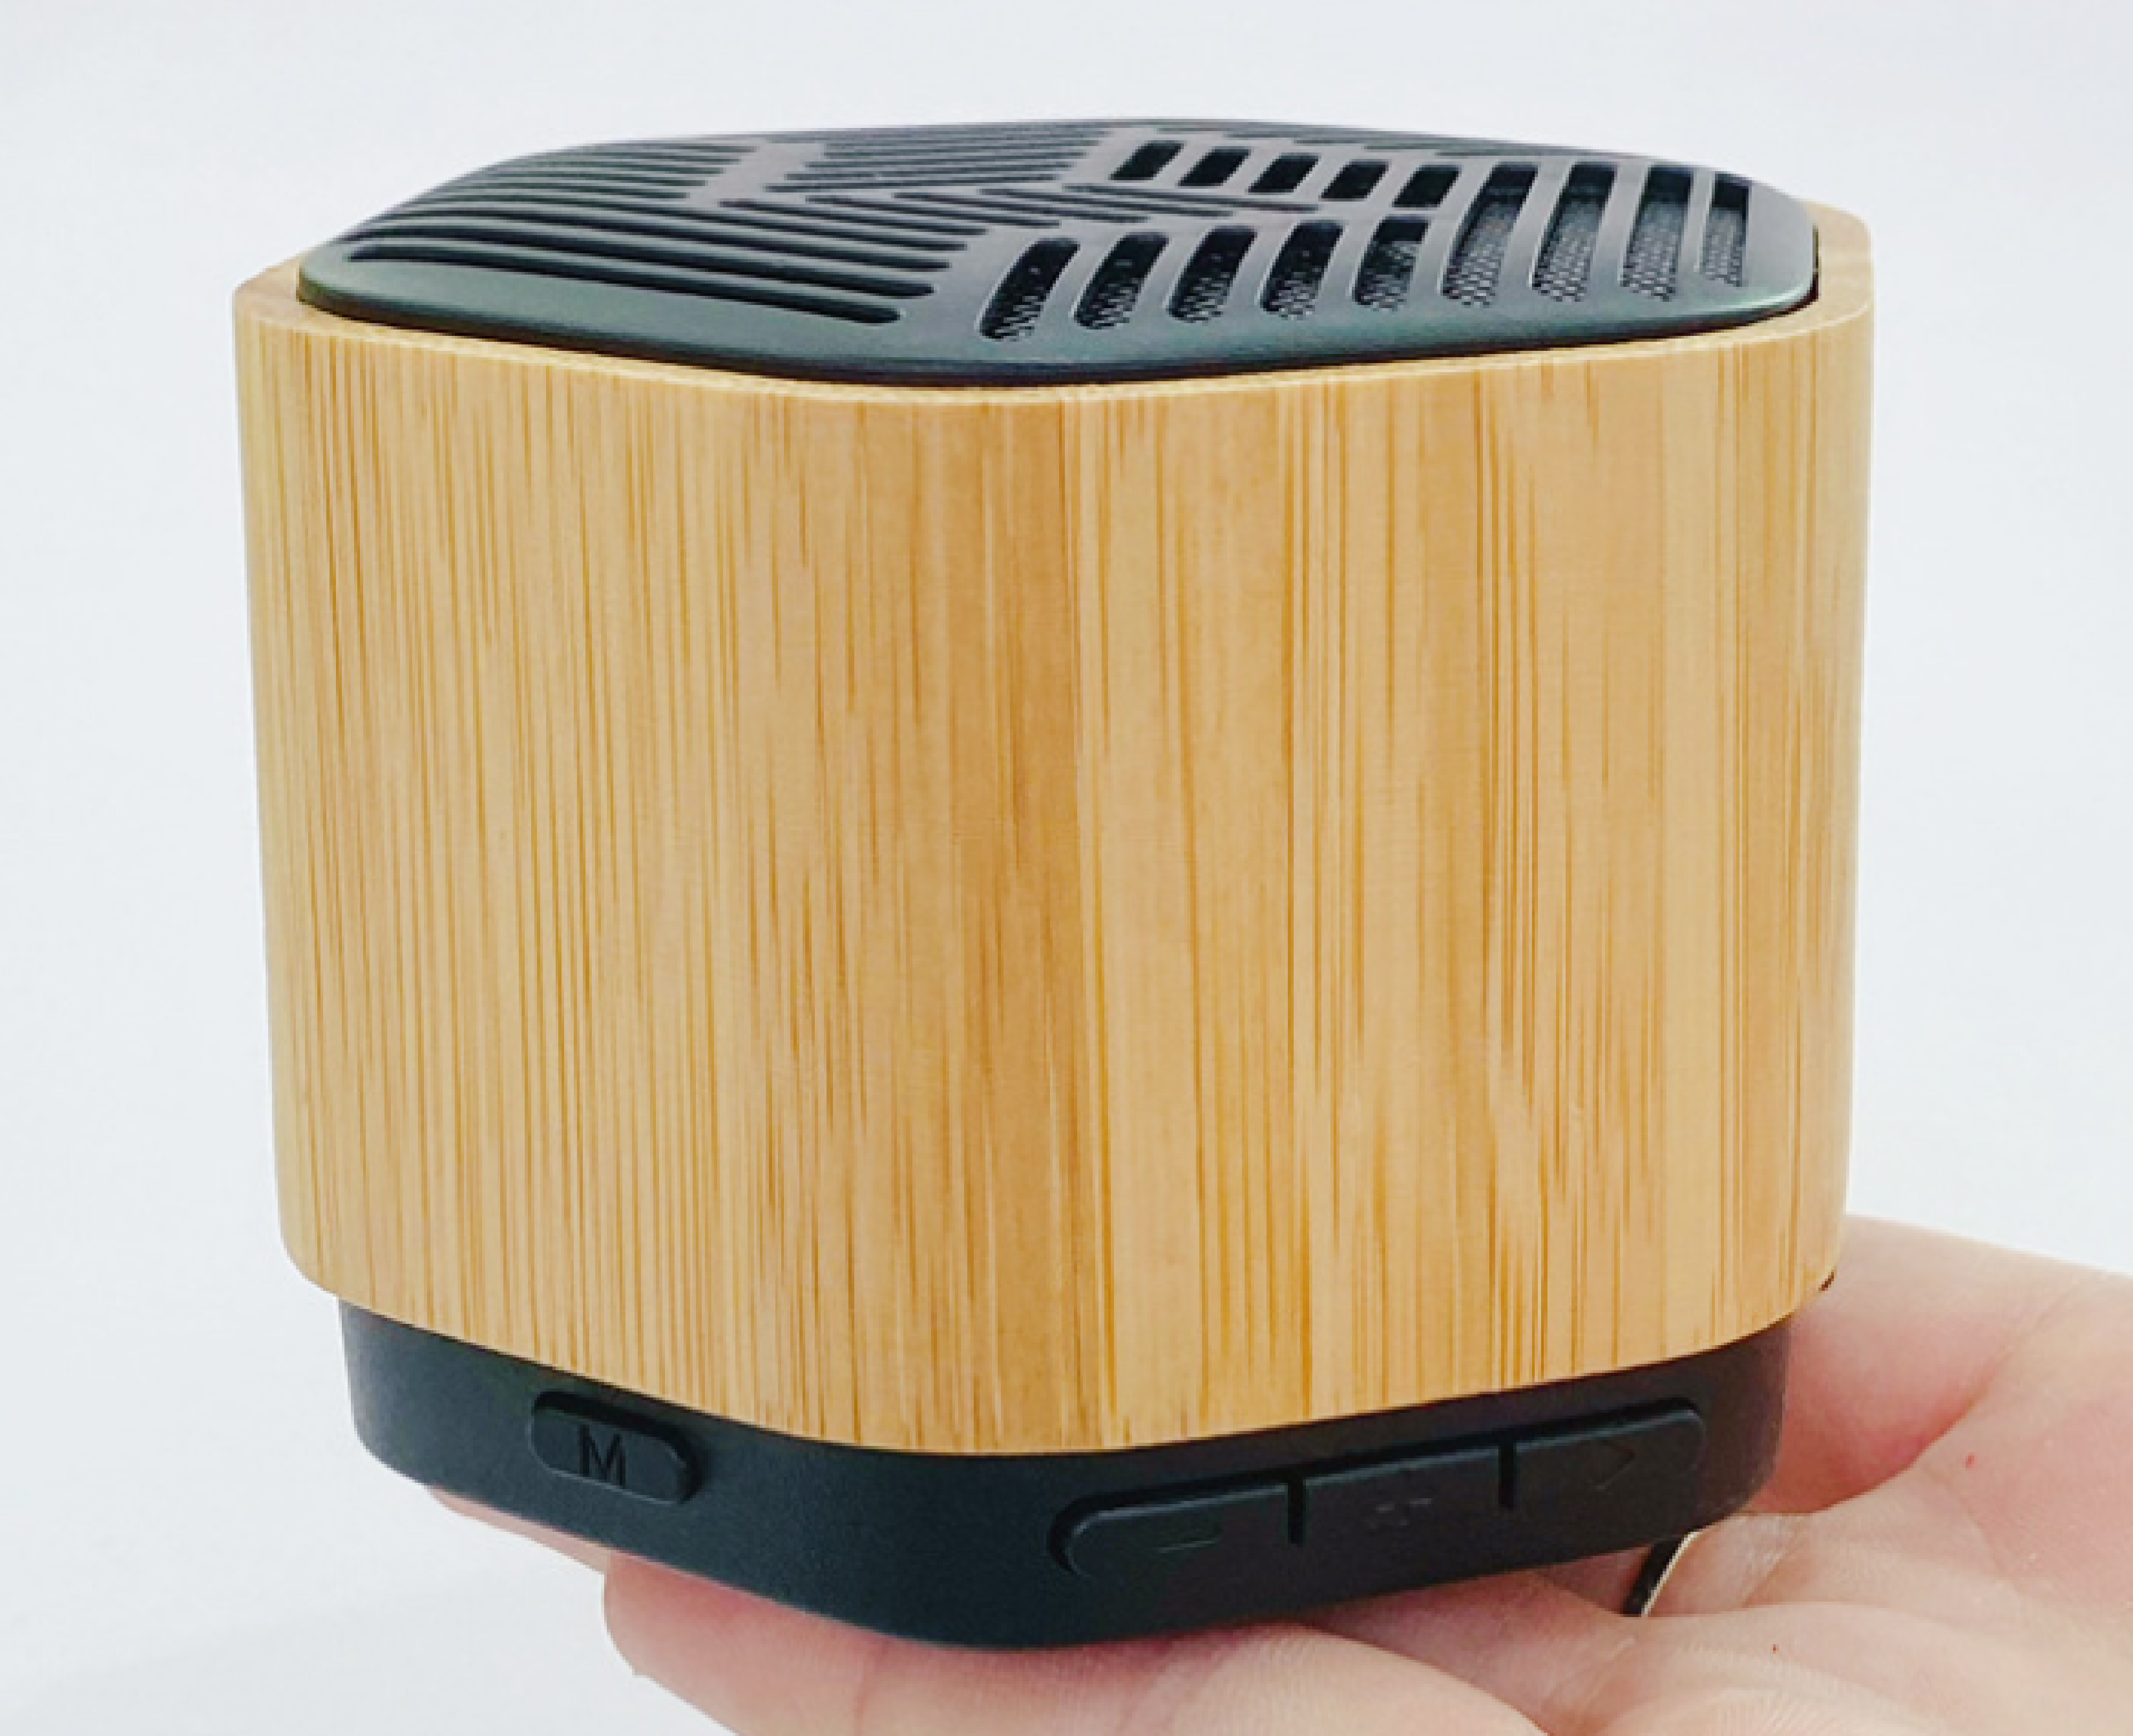  HF10 Bamboo and Wood Small Sound Wooden Radio Bluetooth Speaker